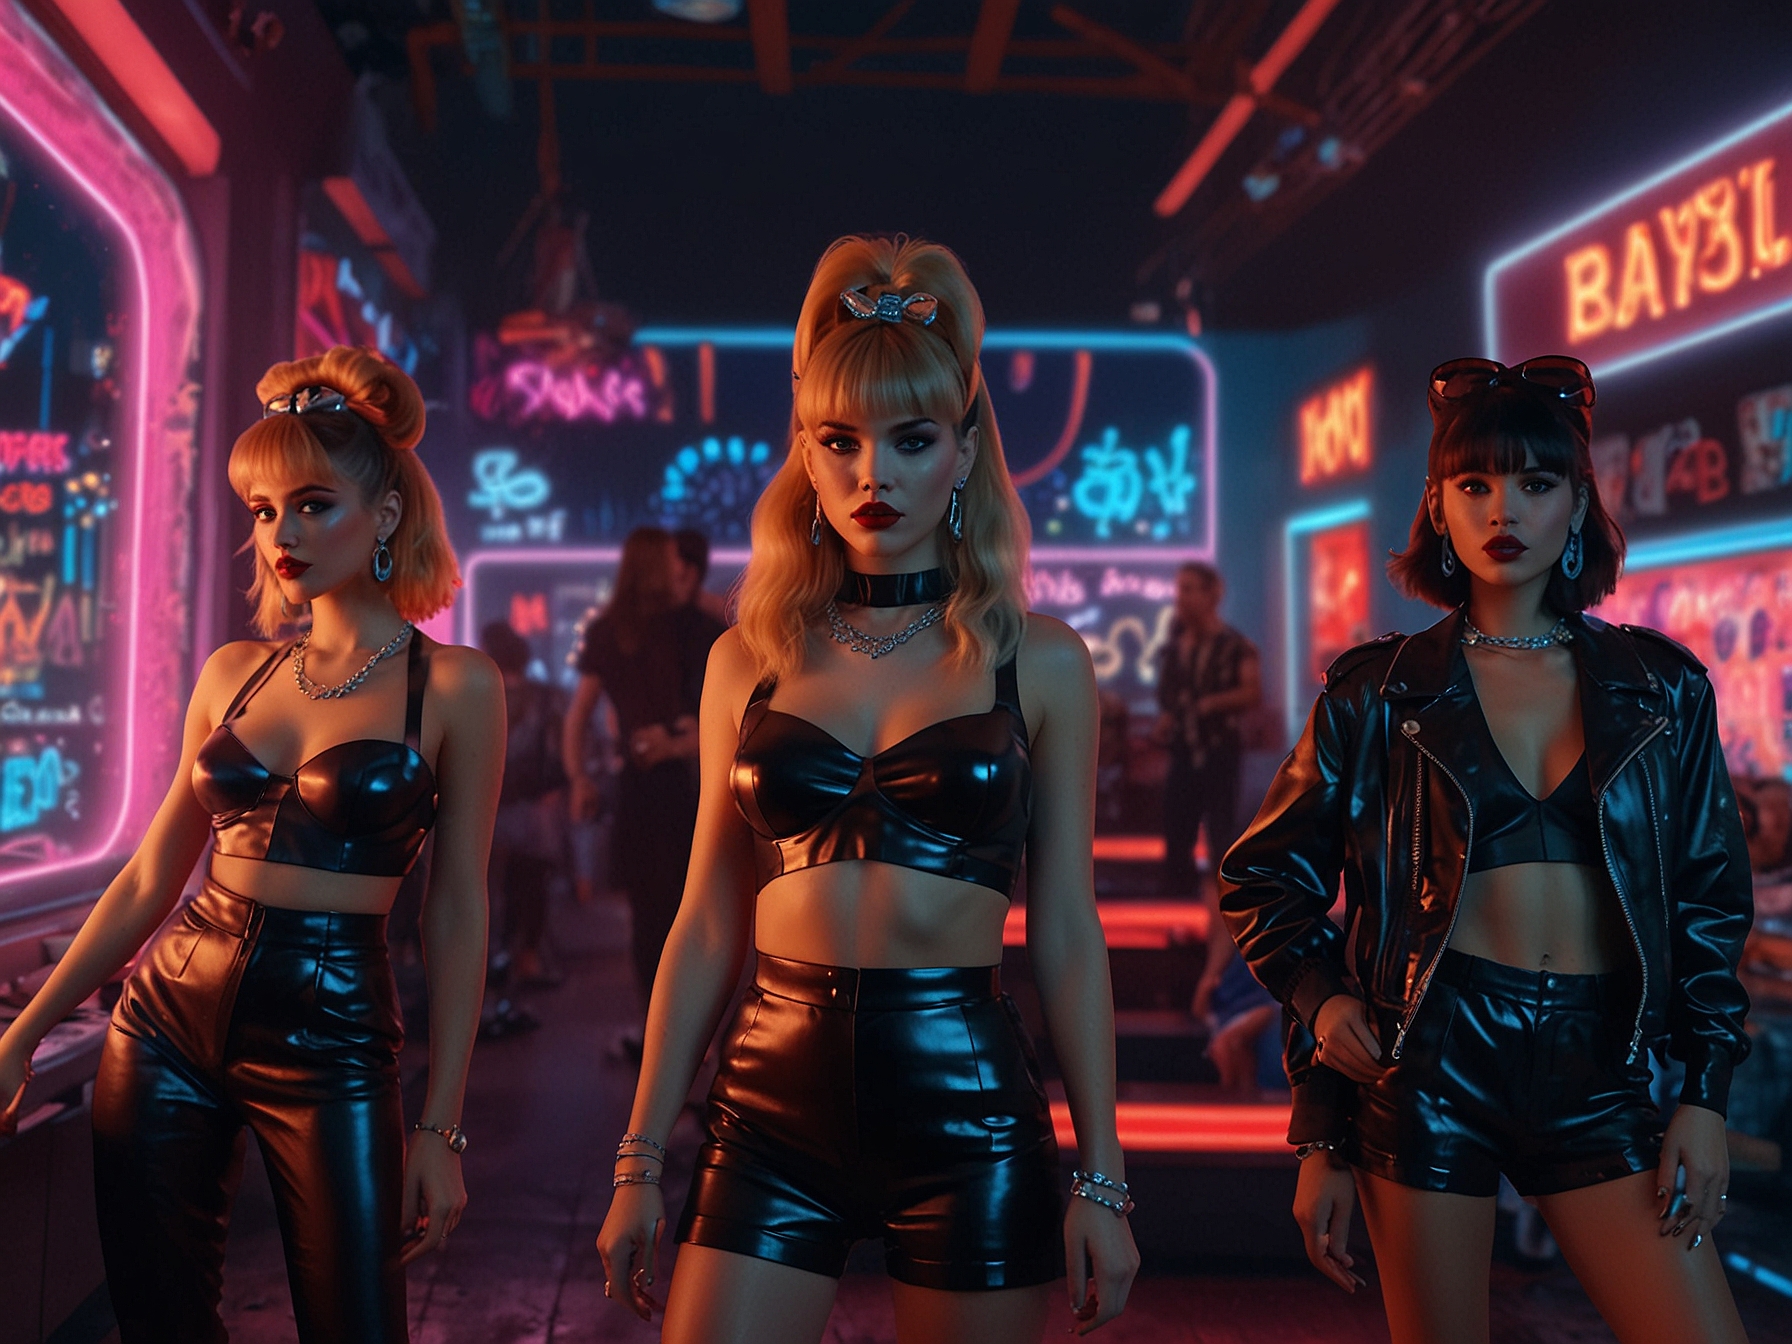 The music video for BABYMONSTER’s ‘FOREVER’ showcases the group in elaborate 1980s-inspired outfits, surrounded by vibrant neon lights and retro-futuristic set designs.